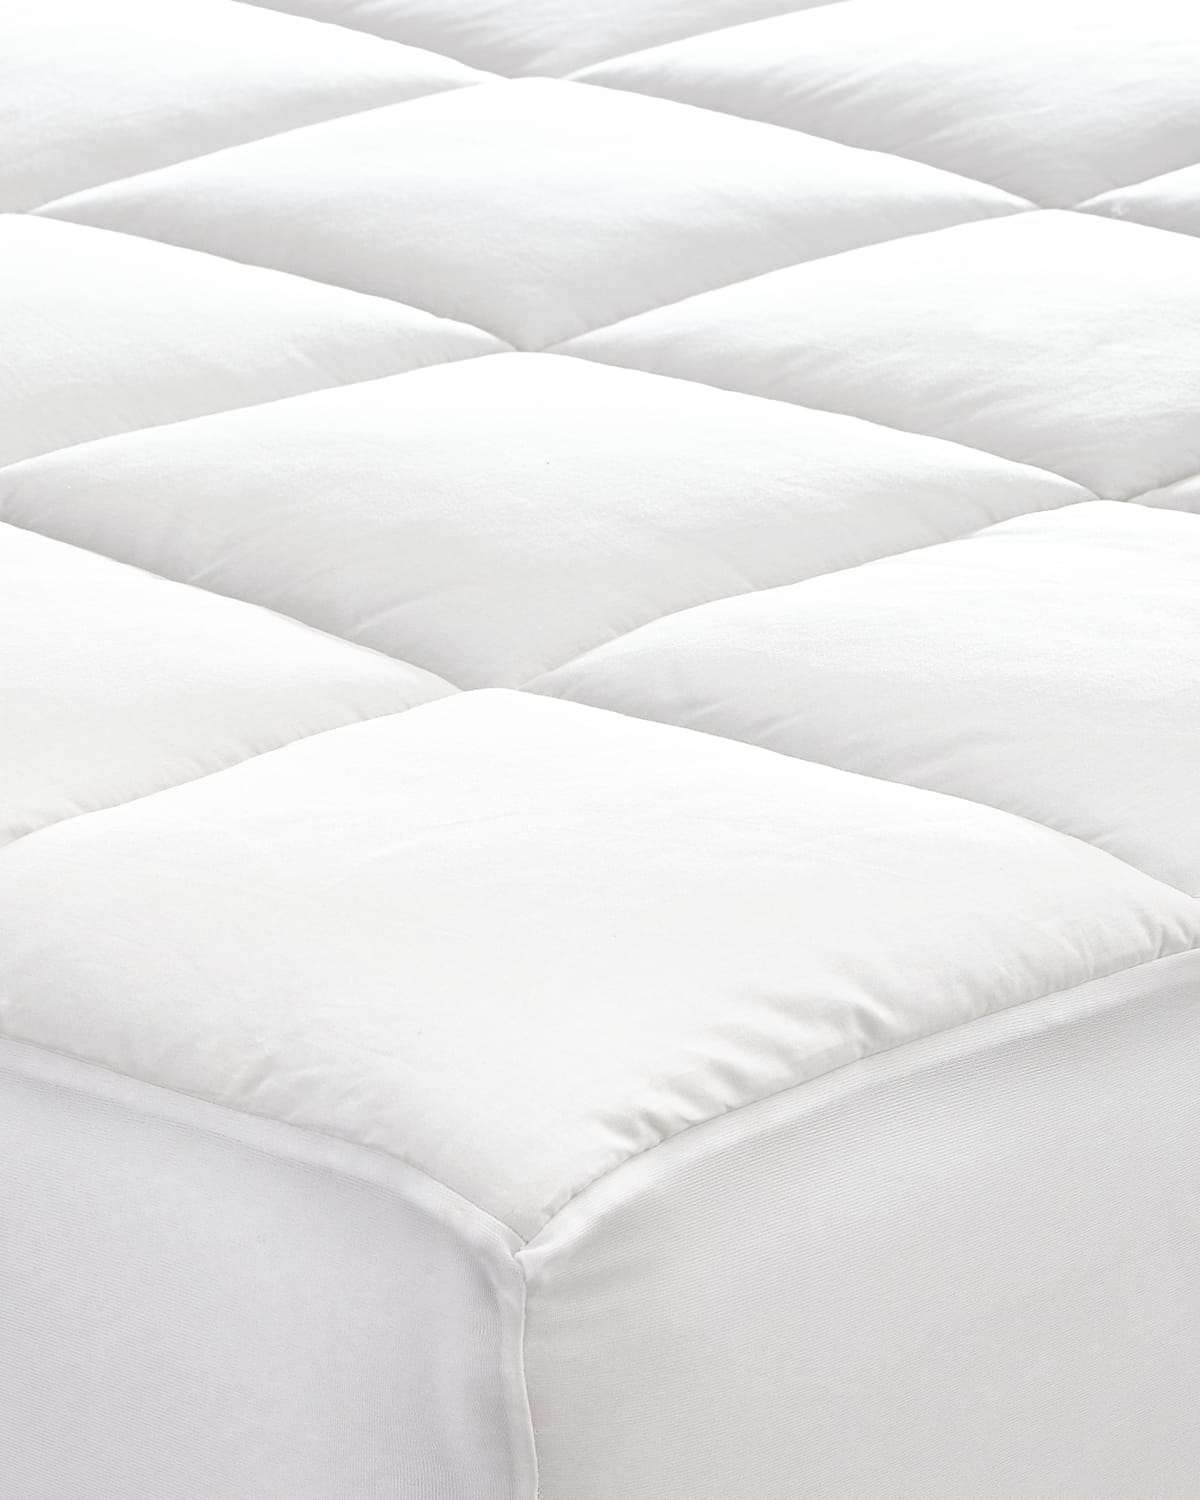 Image Austin Horn Collection King Fitted Mattress Pad